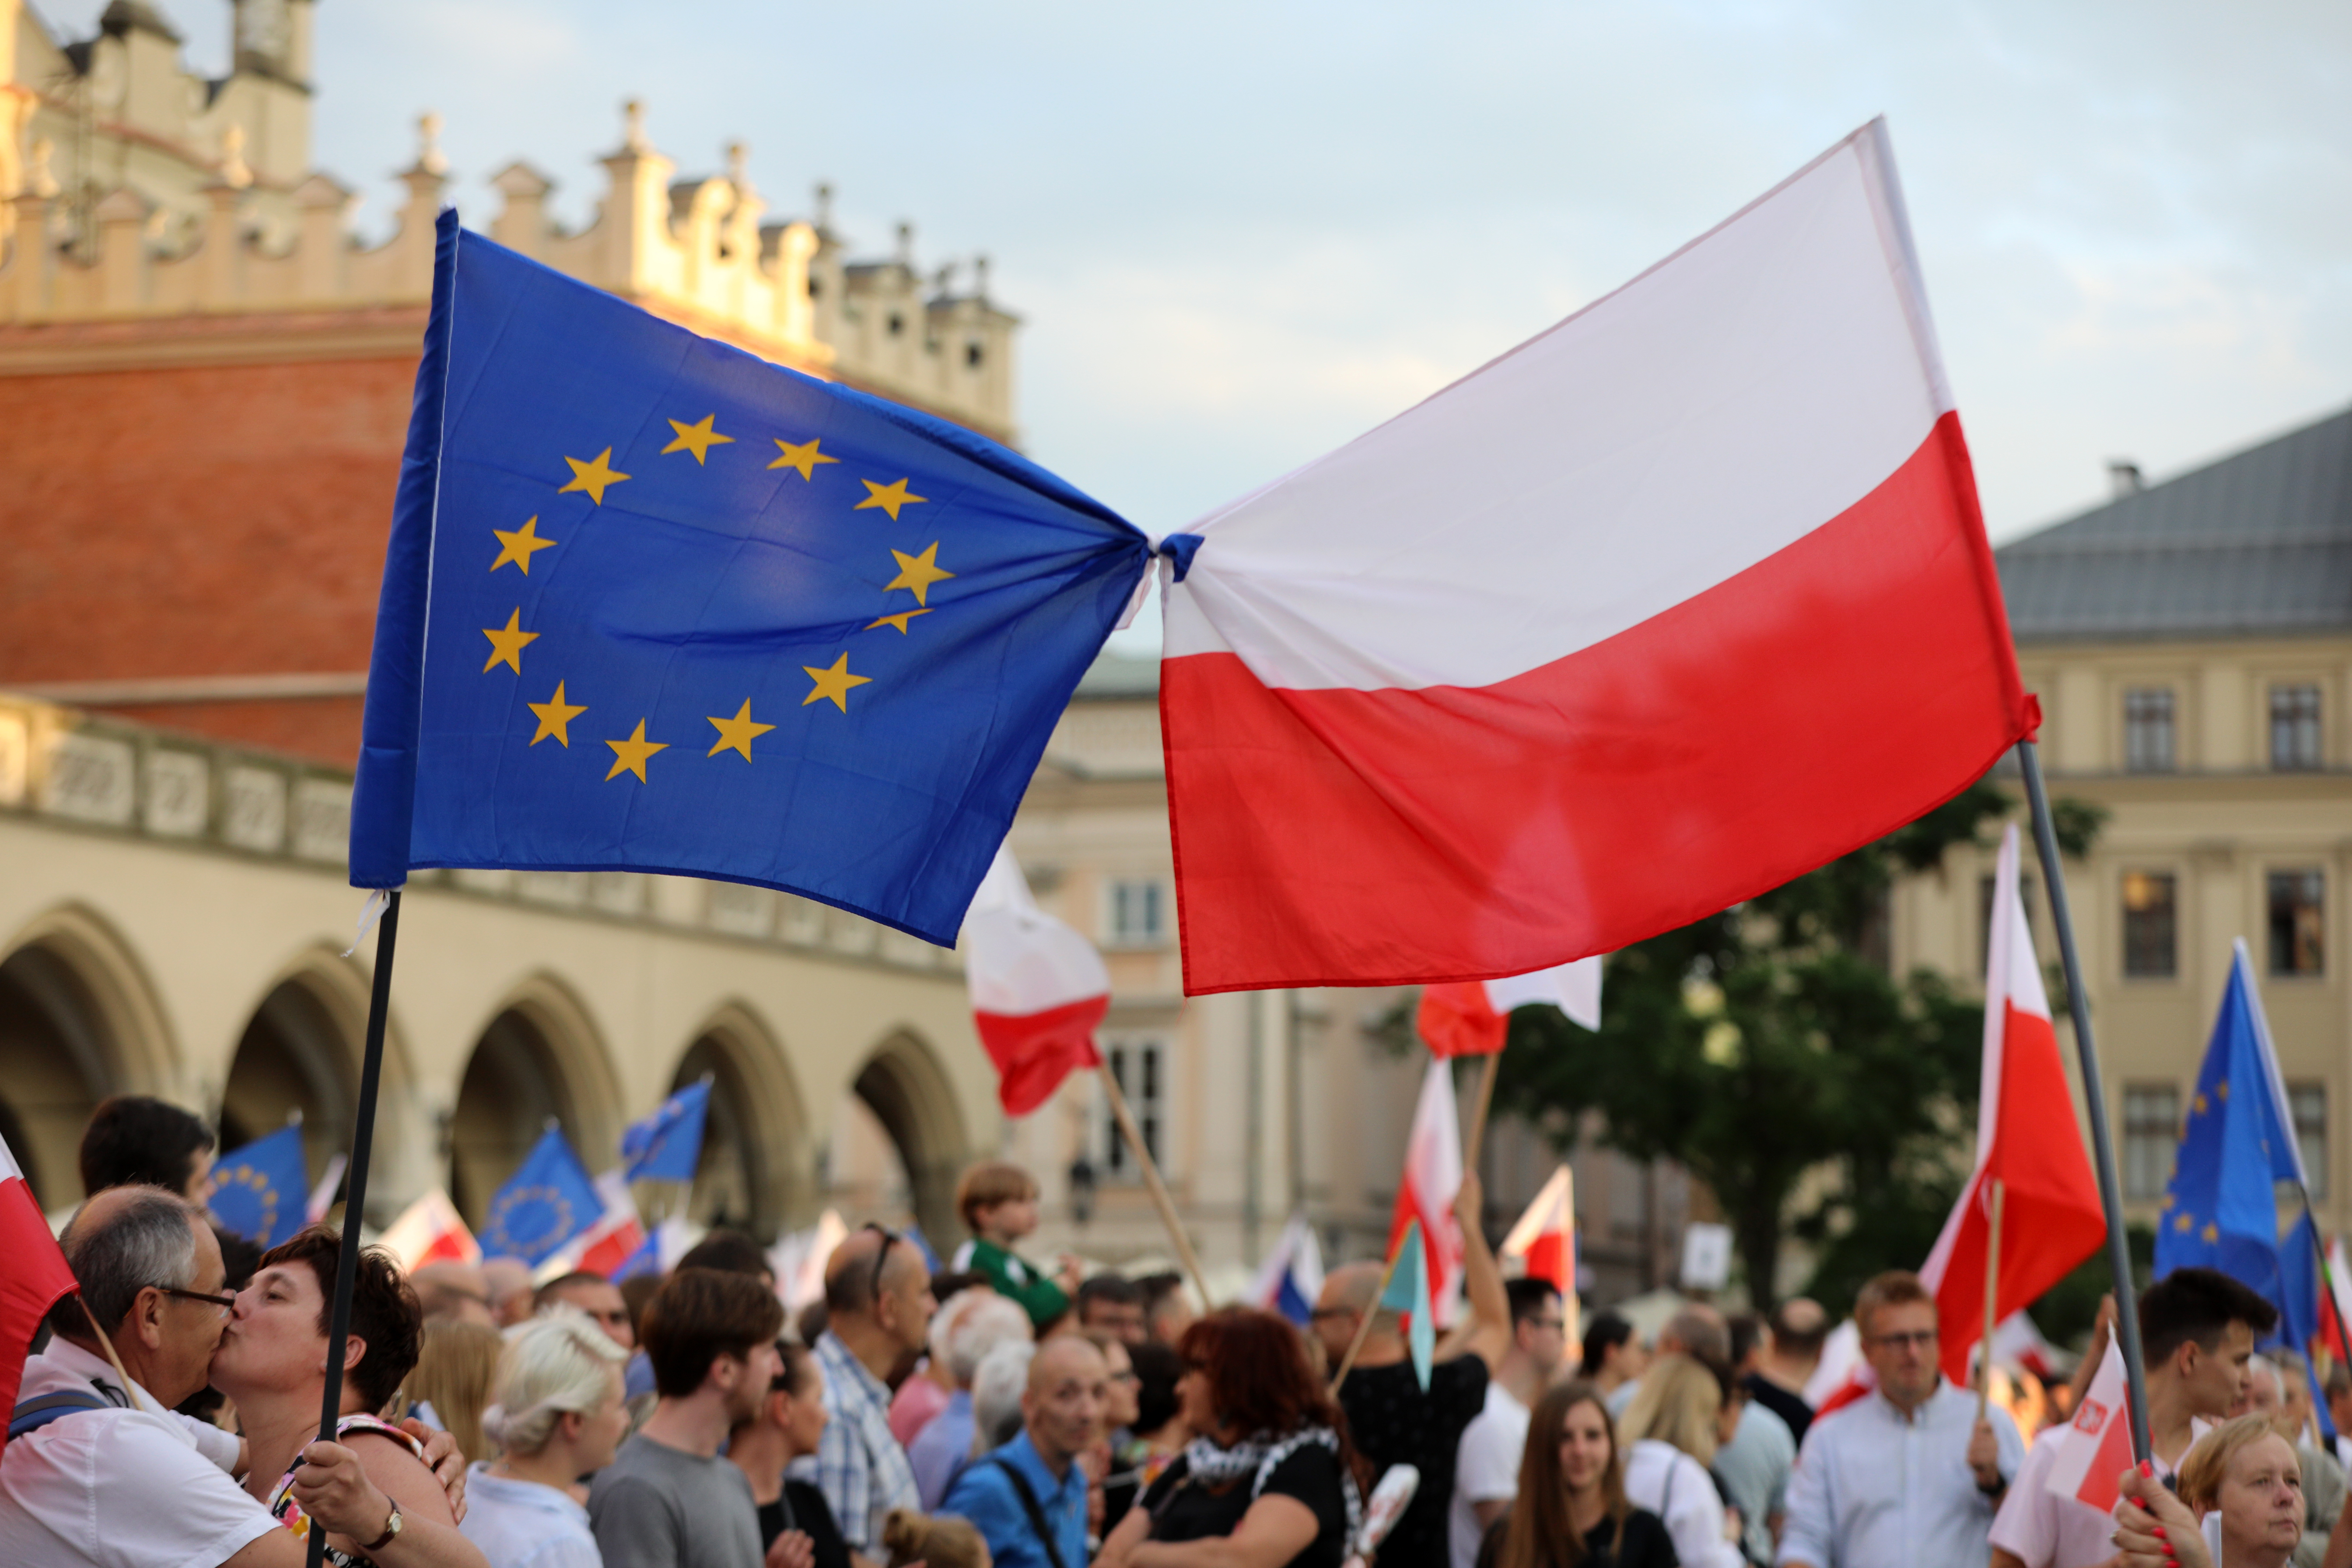 Cracow, Poland - People protest against violation of the constitutional law in Poland in defense of the triad of division of power and independence of the highest court in Poland, July 23, 2017. 